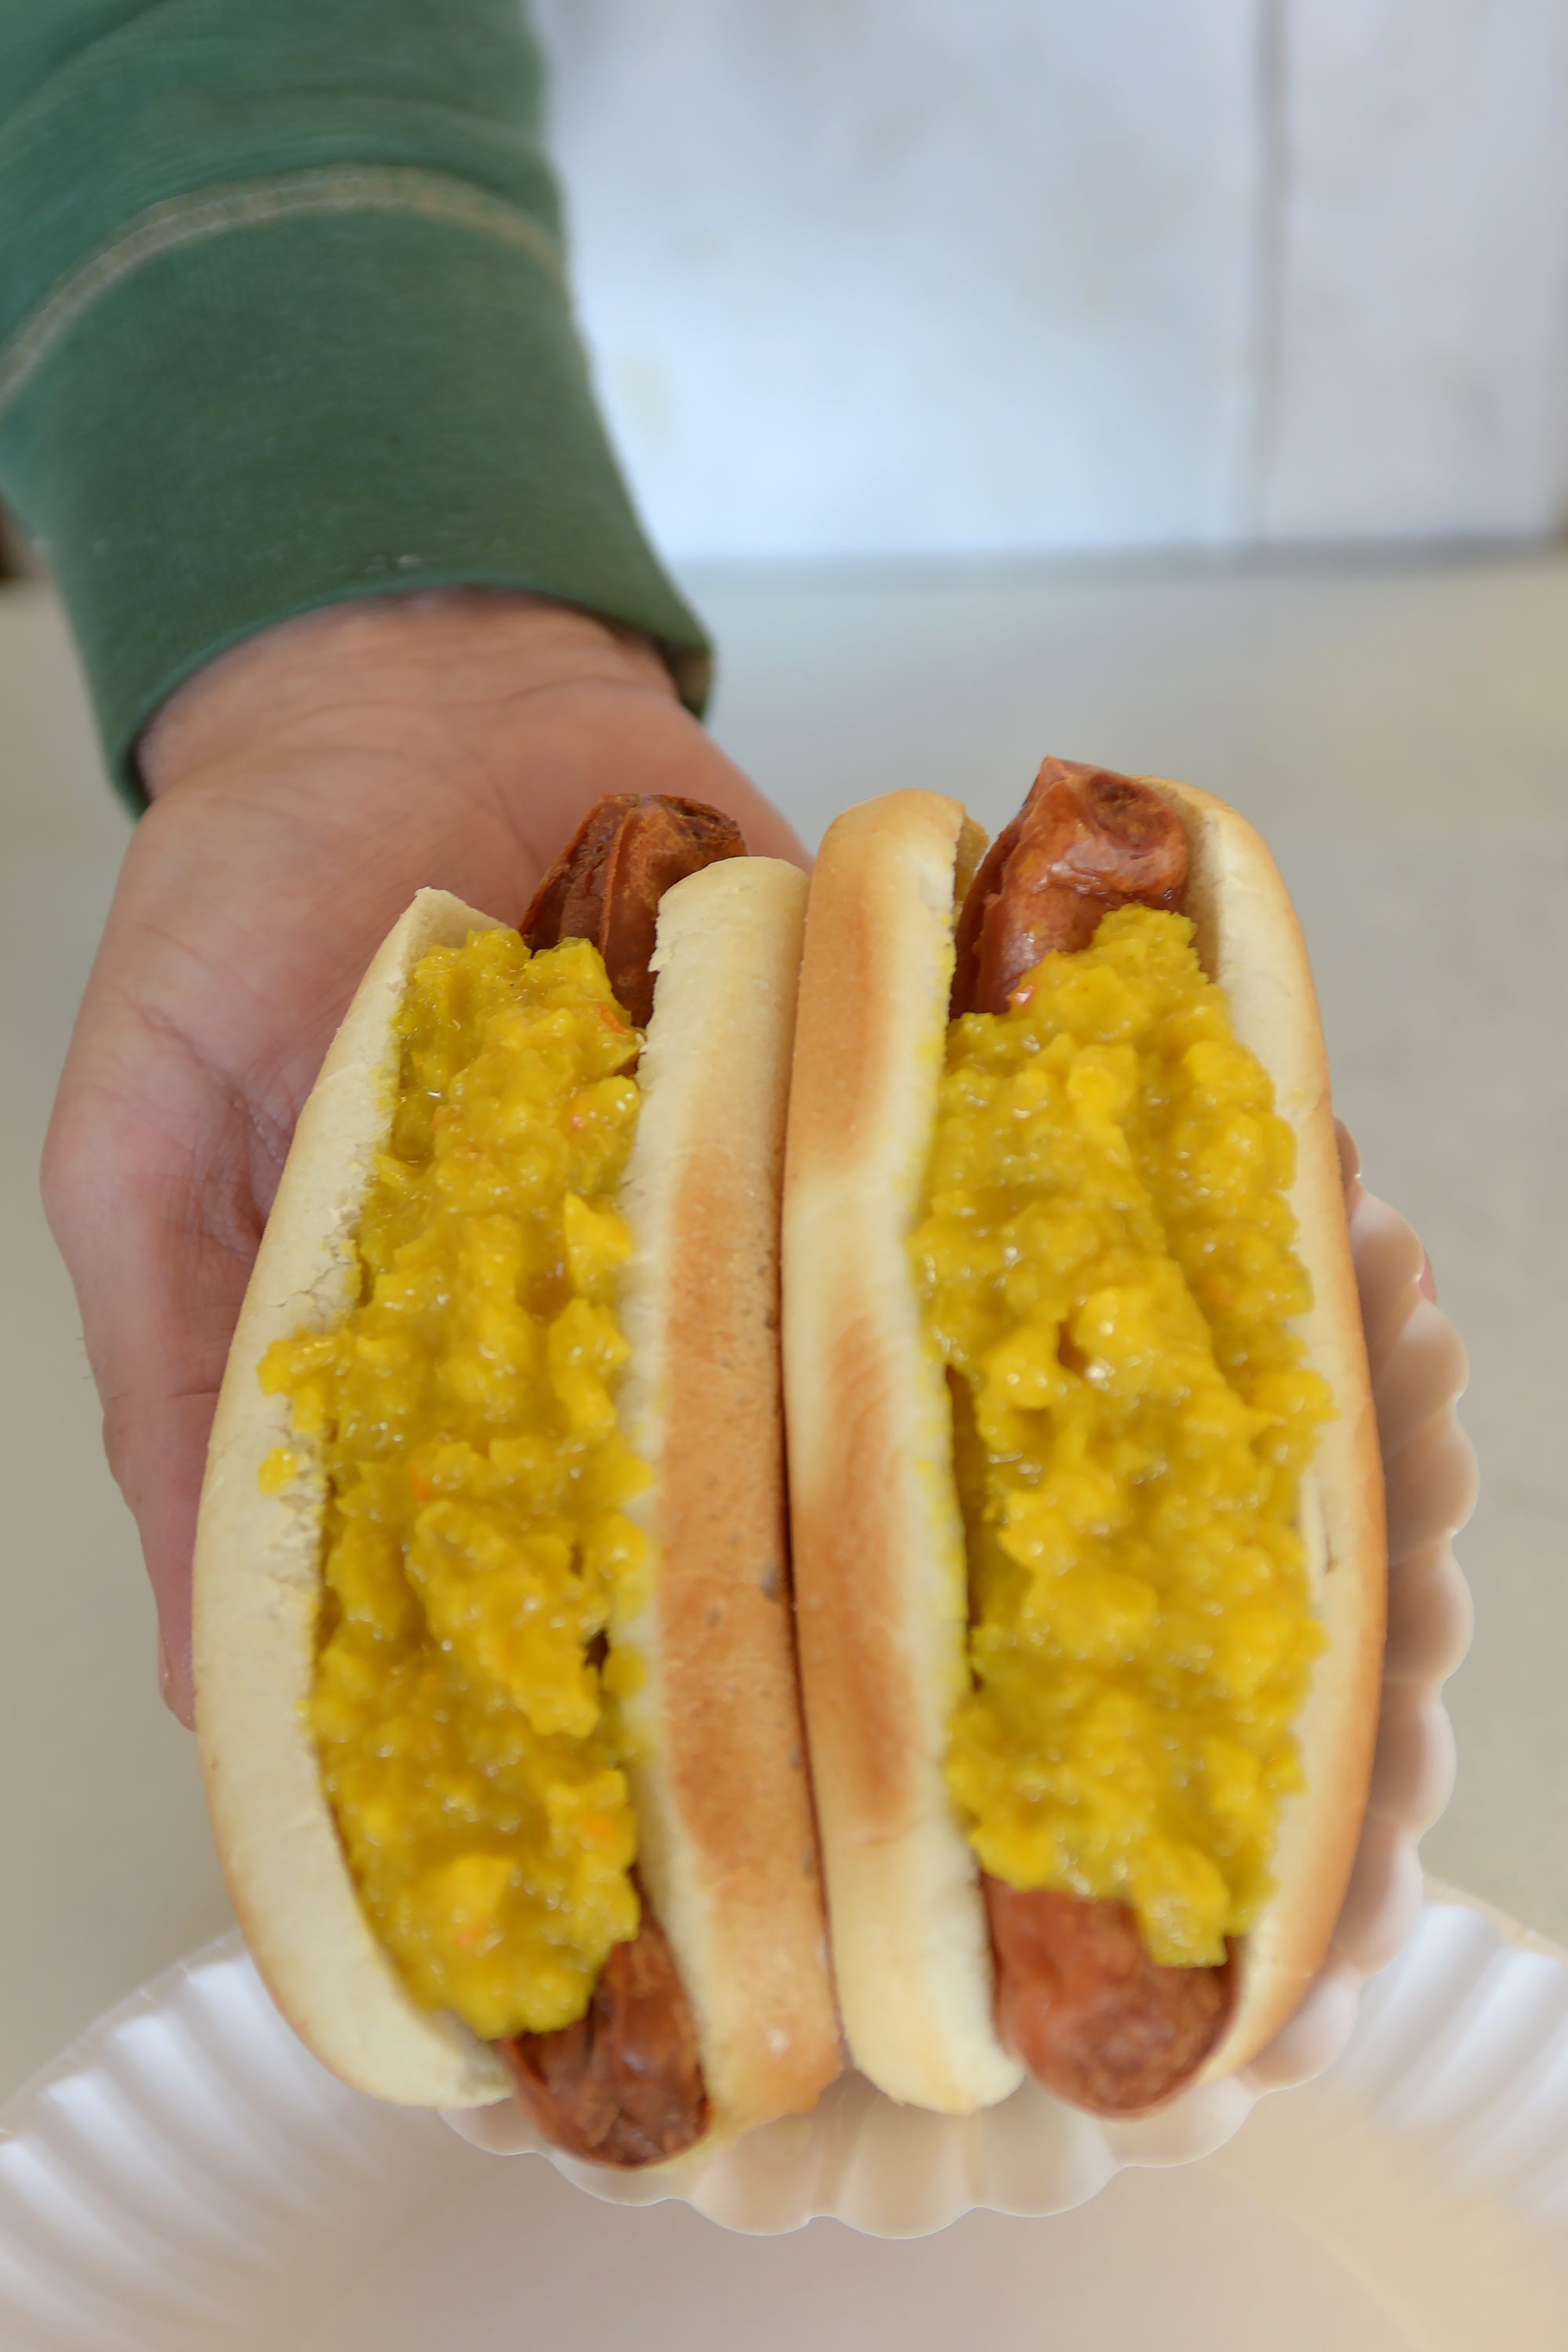 Rutt's Hut has been serving rippers (fried hot dogs) with a special homemade relish since 1928 in Clifton.